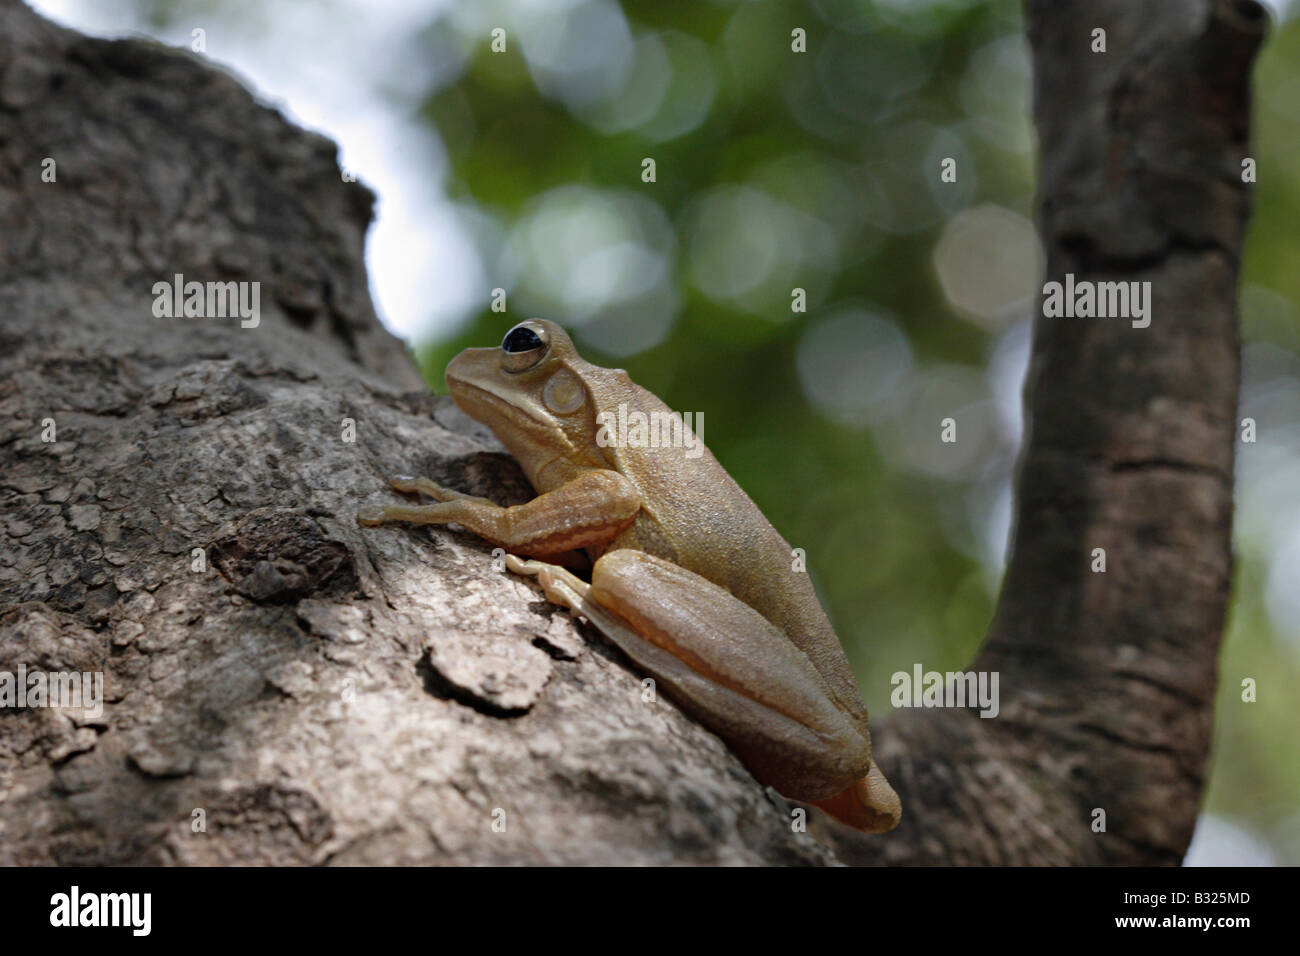 The Common Tree Frog, Four-lined Tree Frog, or White-lipped Tree Frog (Polypedates leucomystax) is a species of frog. Stock Photo